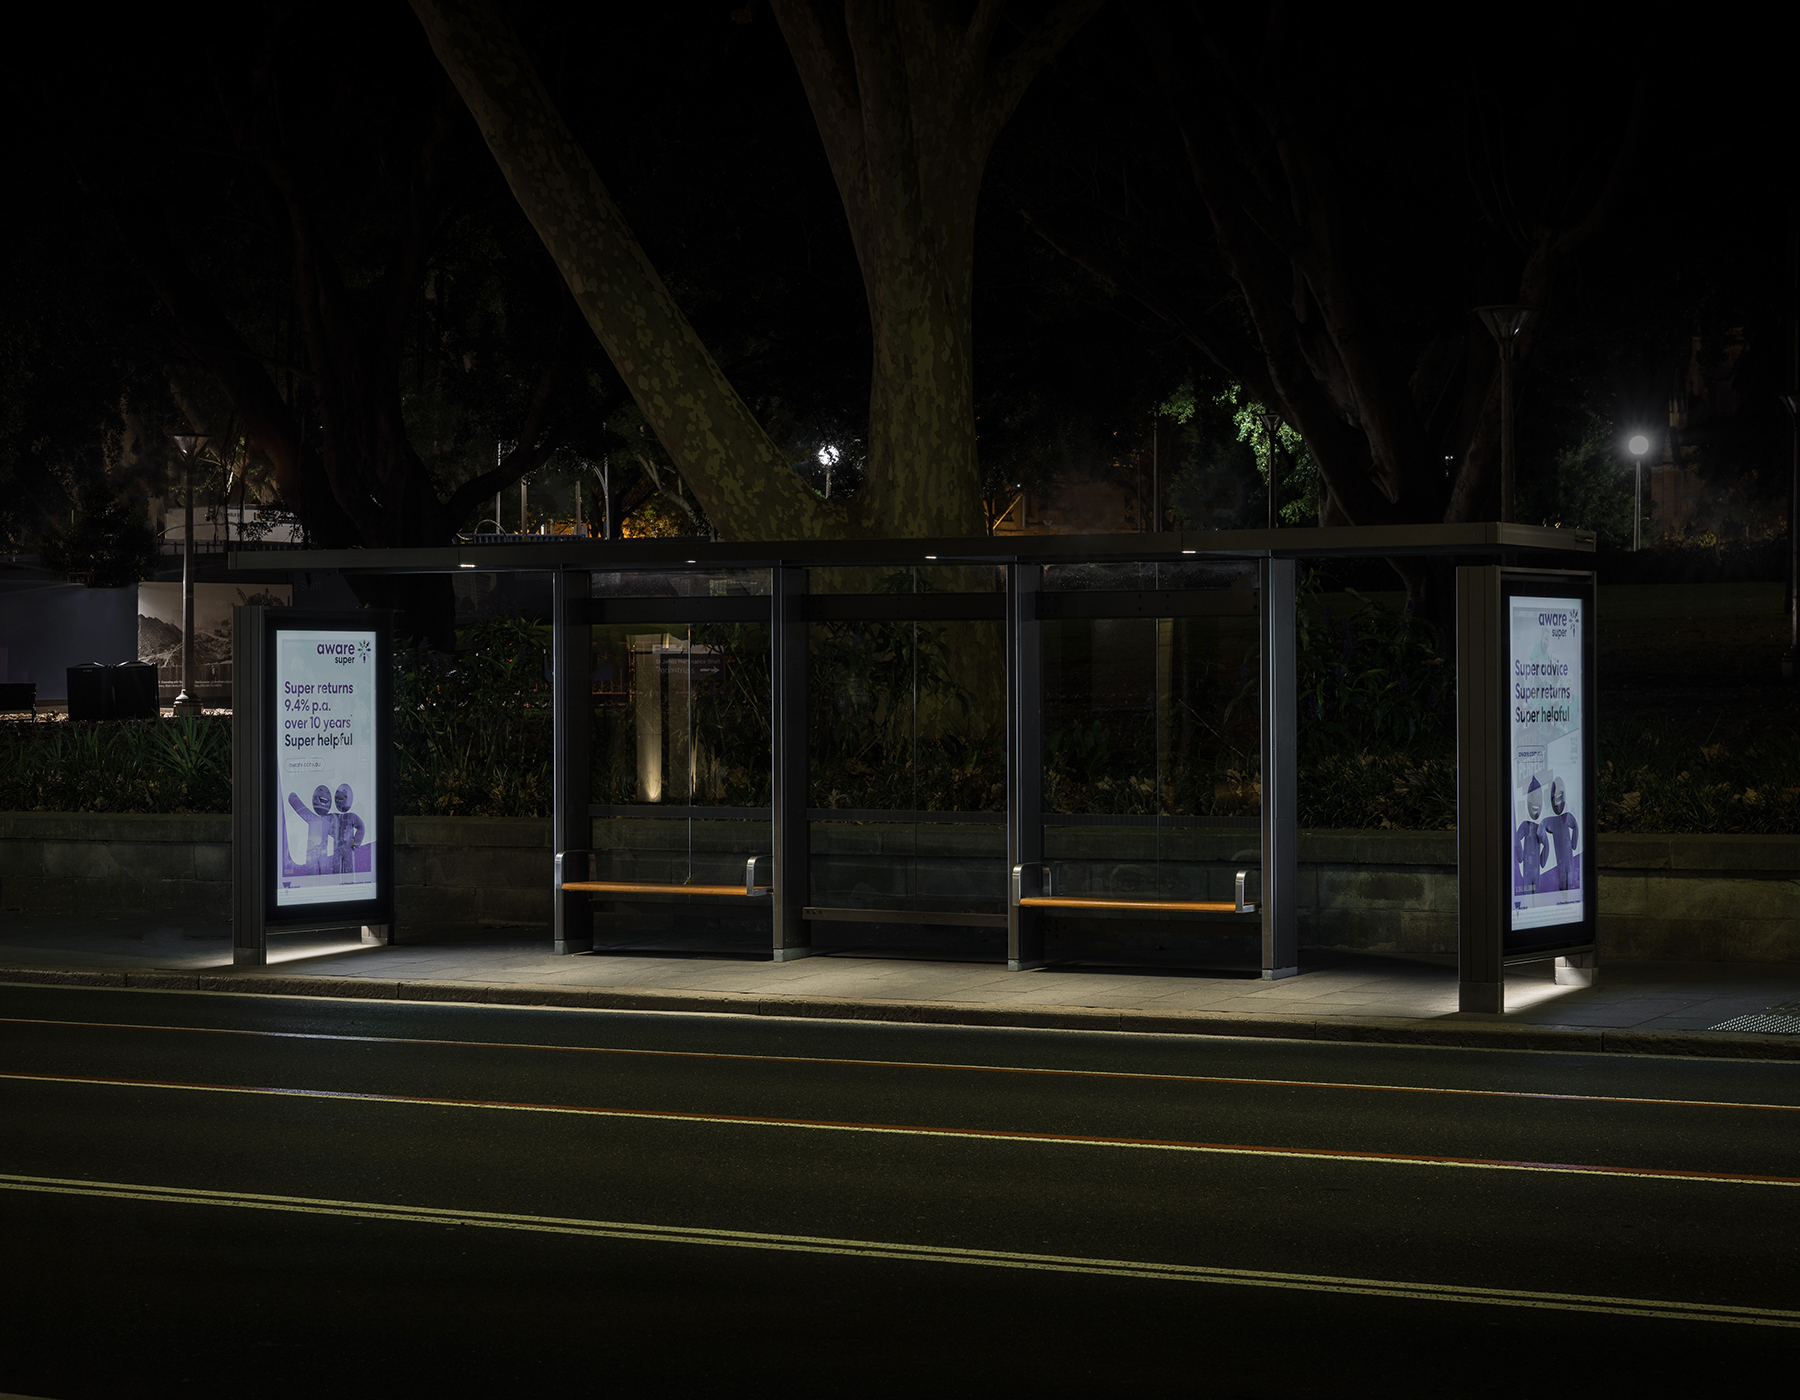 Sydney Bus Shelters featuring iGuzzini LaserBlade supplied by Studio 100 JBW